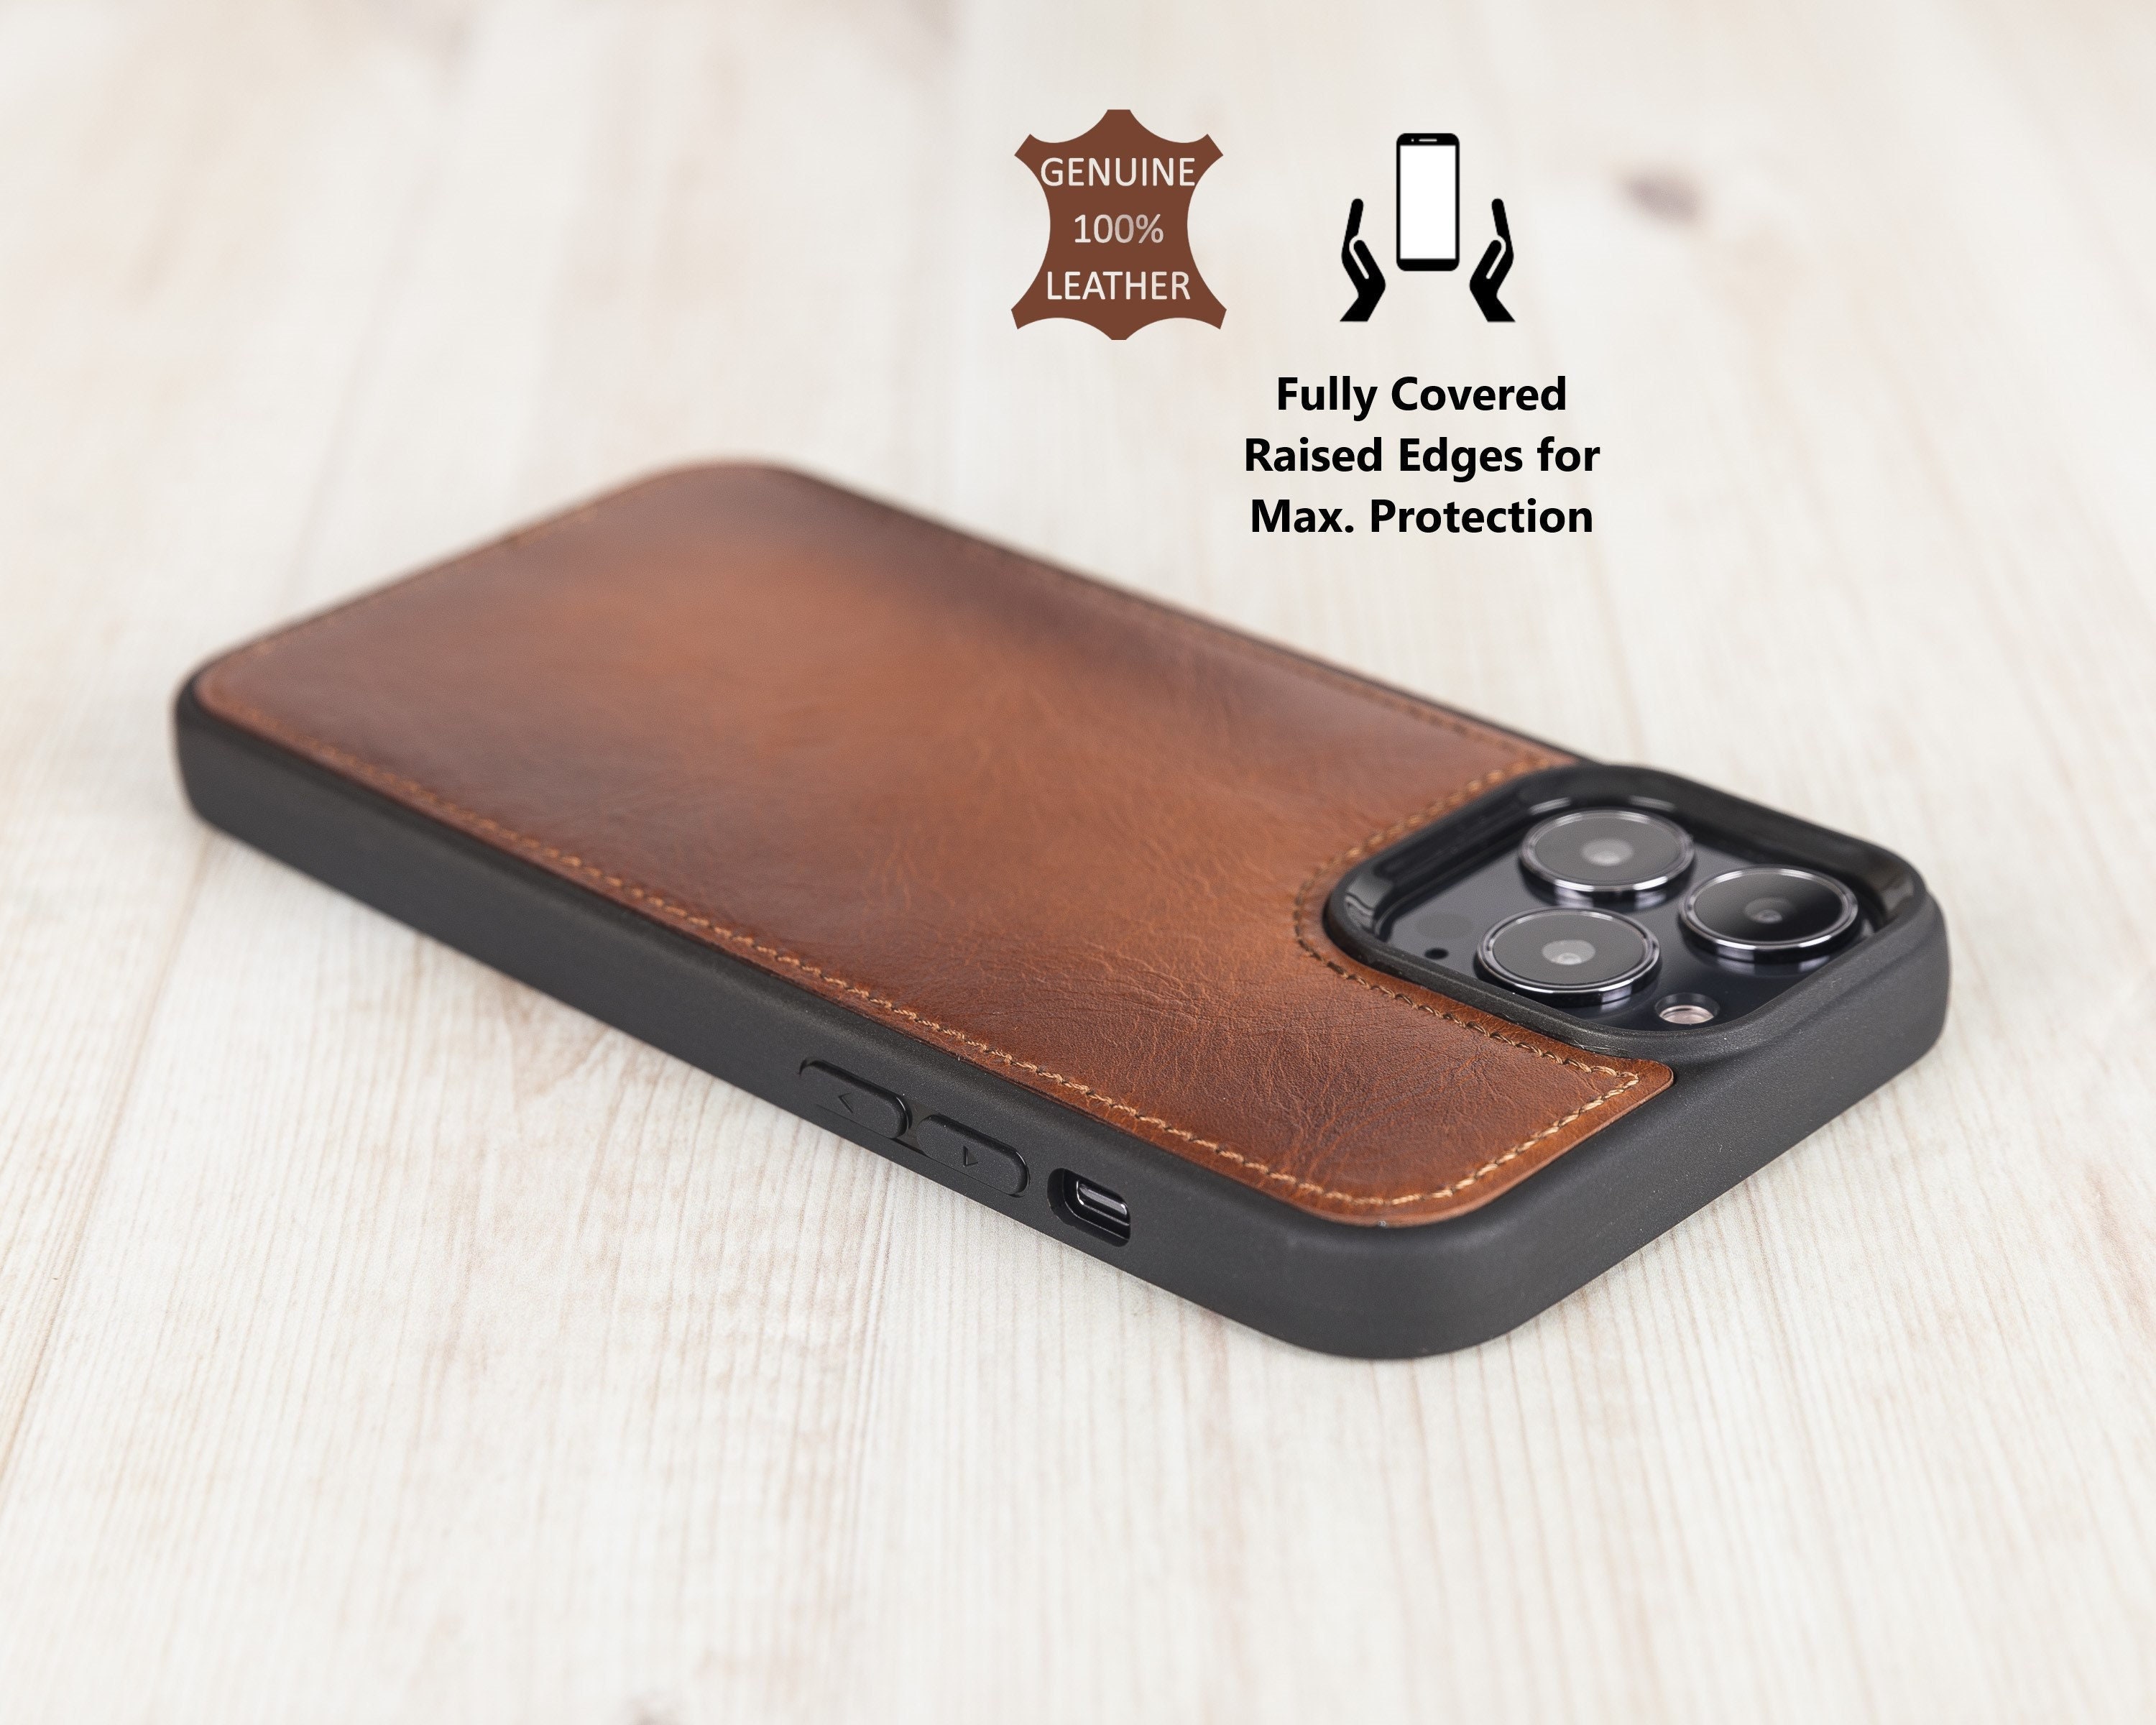 Iphone 11 Case Discover high quality leather wallet case For iPhone 11/ iPhone 11 Pro/ iPhone 11 Pro Max (Nee…